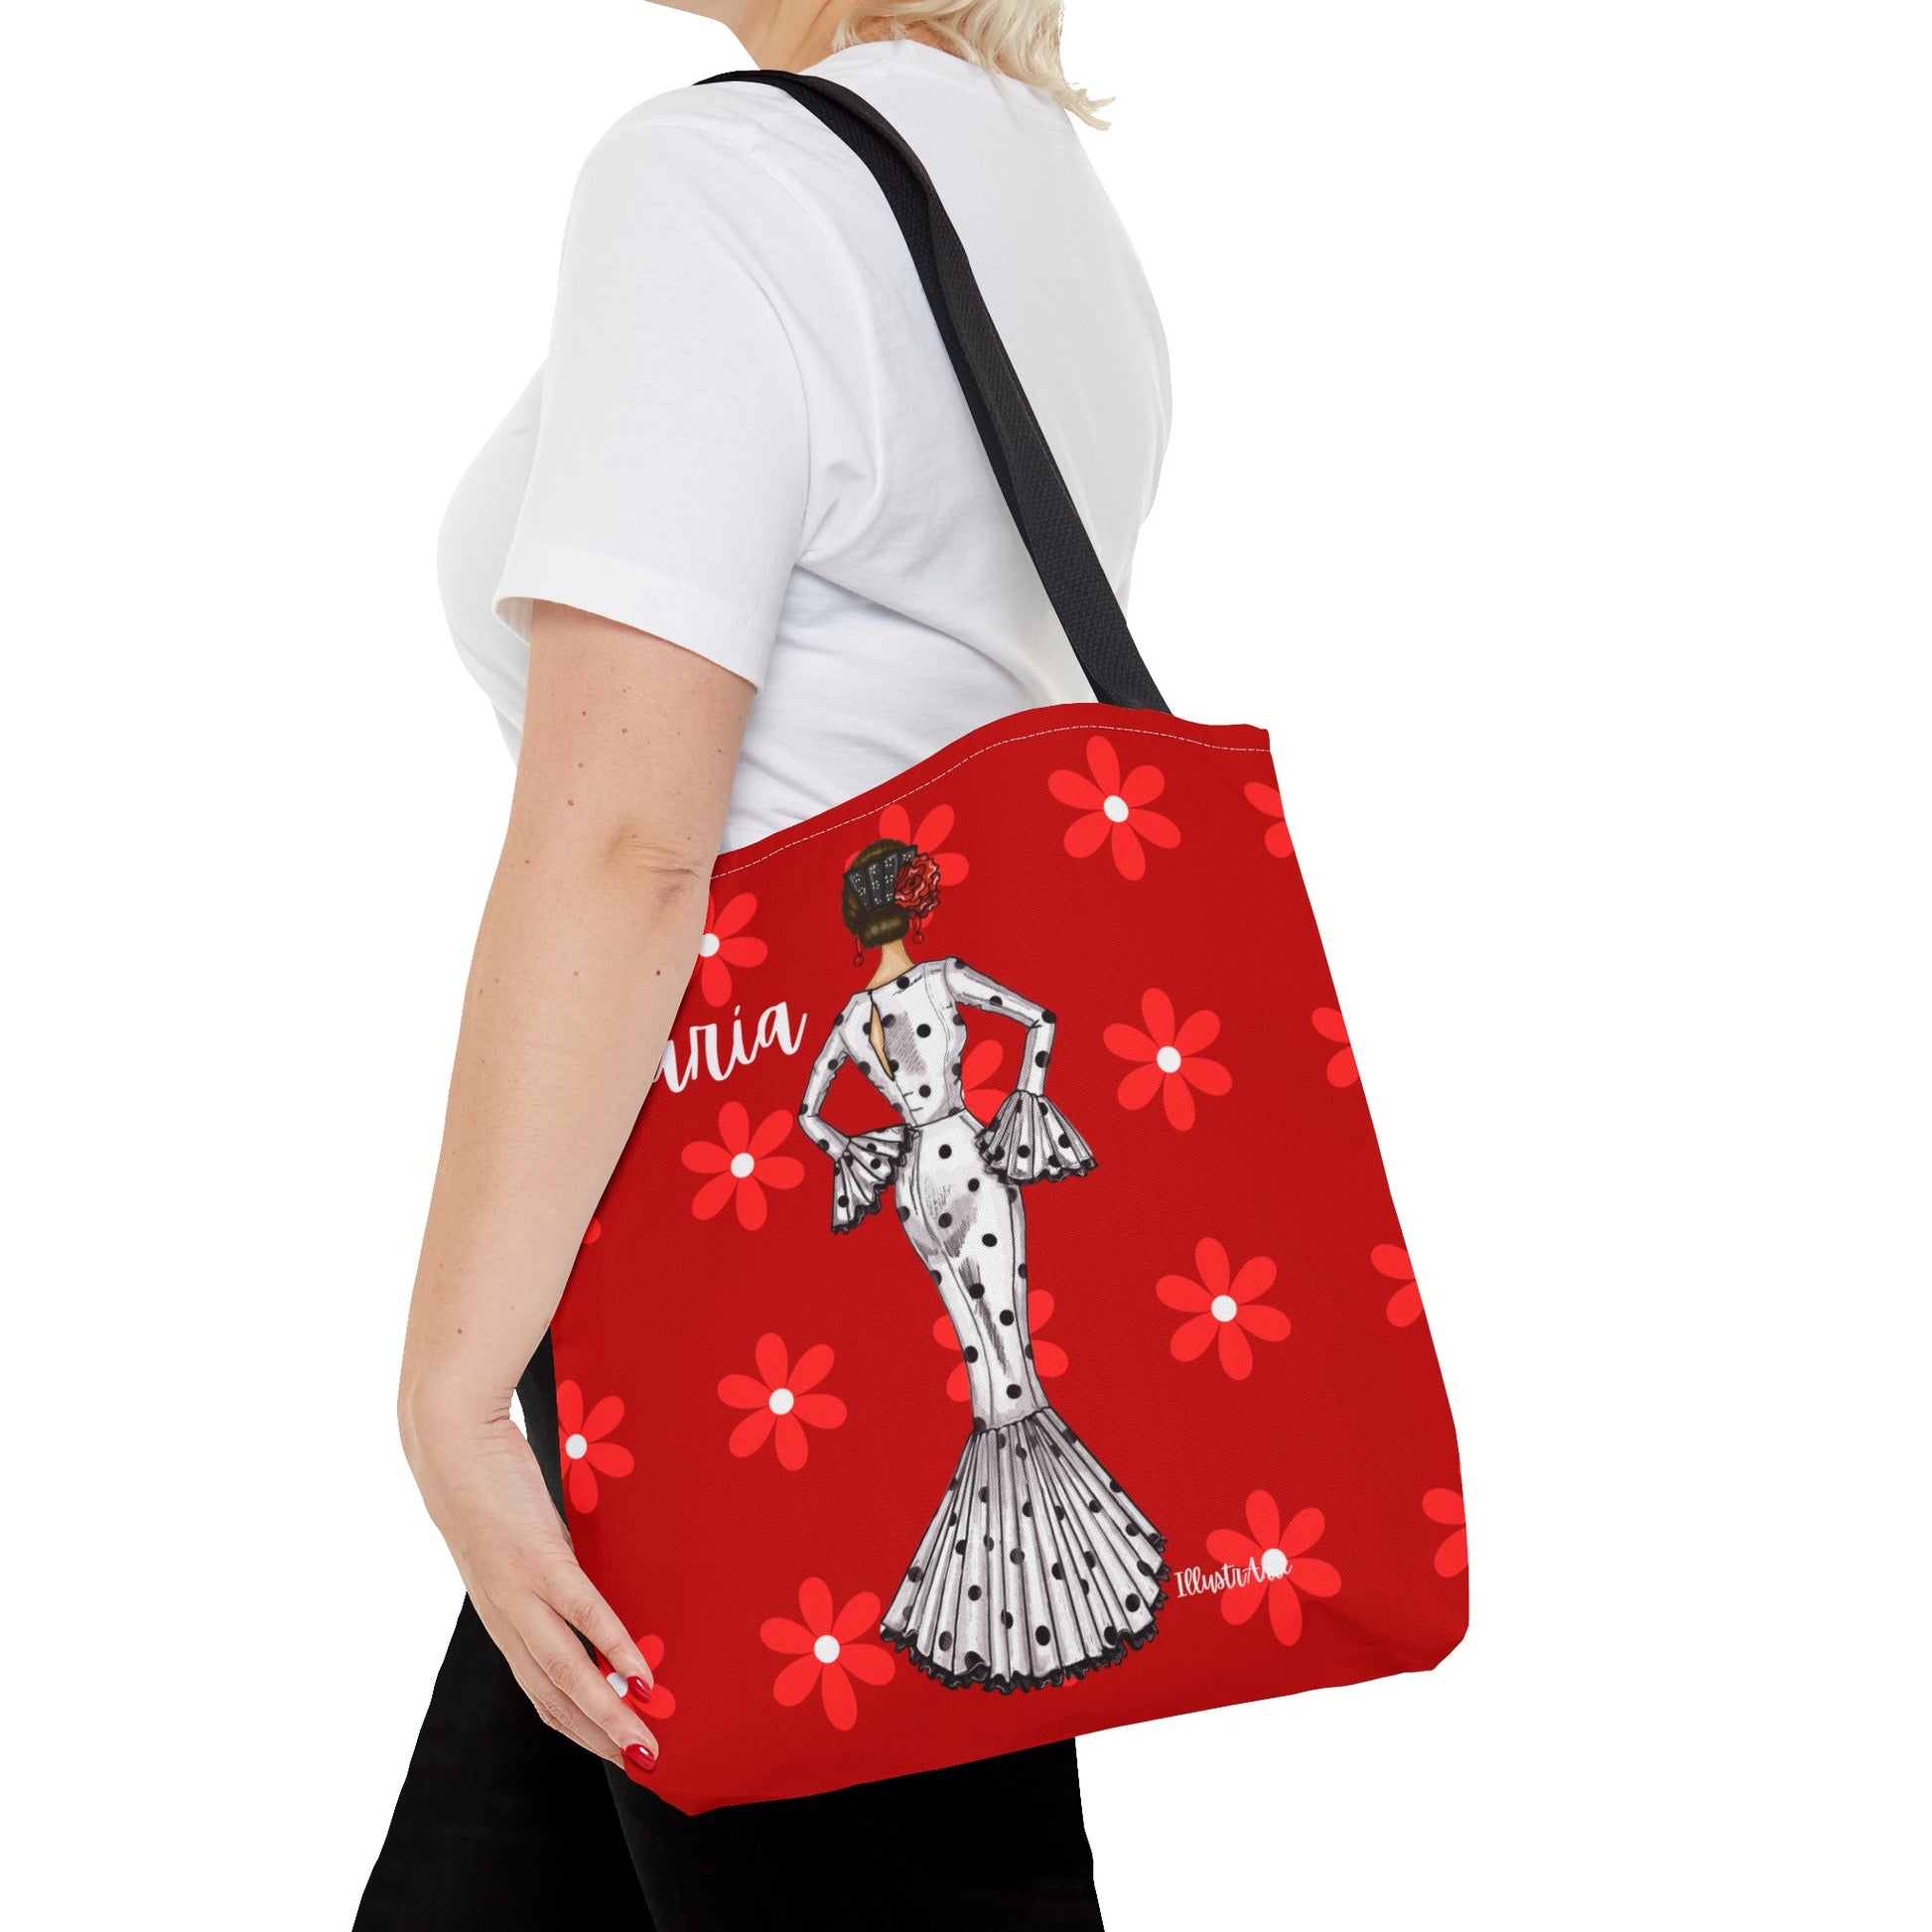 a woman carrying a red tote bag with a dalmatian design